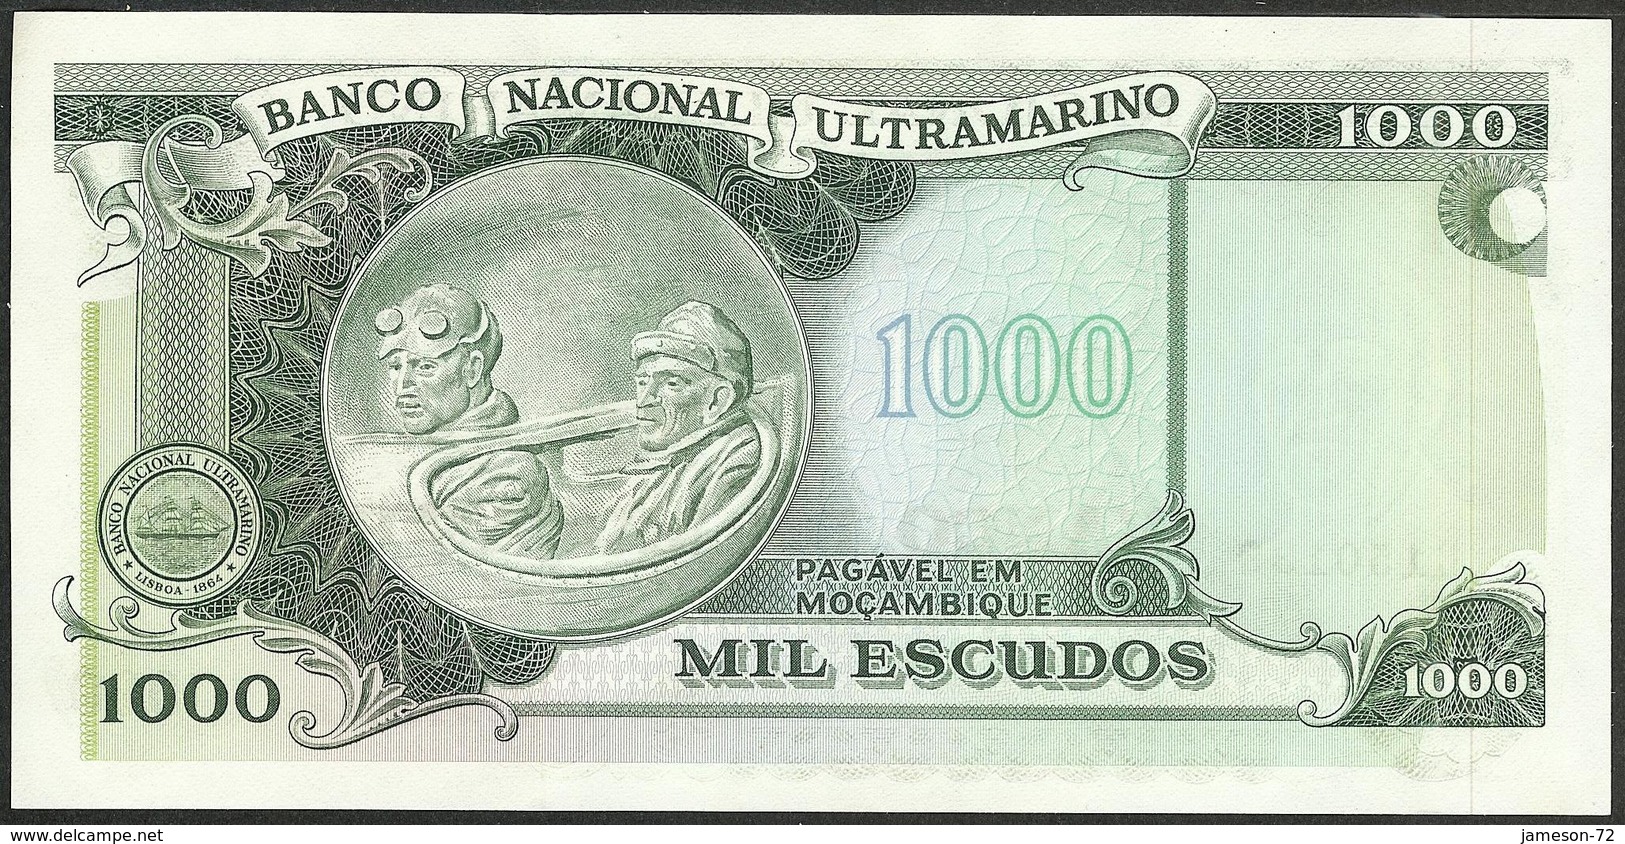 MOZAMBIQUE - 1000 Escudos ND (1976, Old Date 1972) P# 119 UNC - Edelweiss Coins - Mozambique